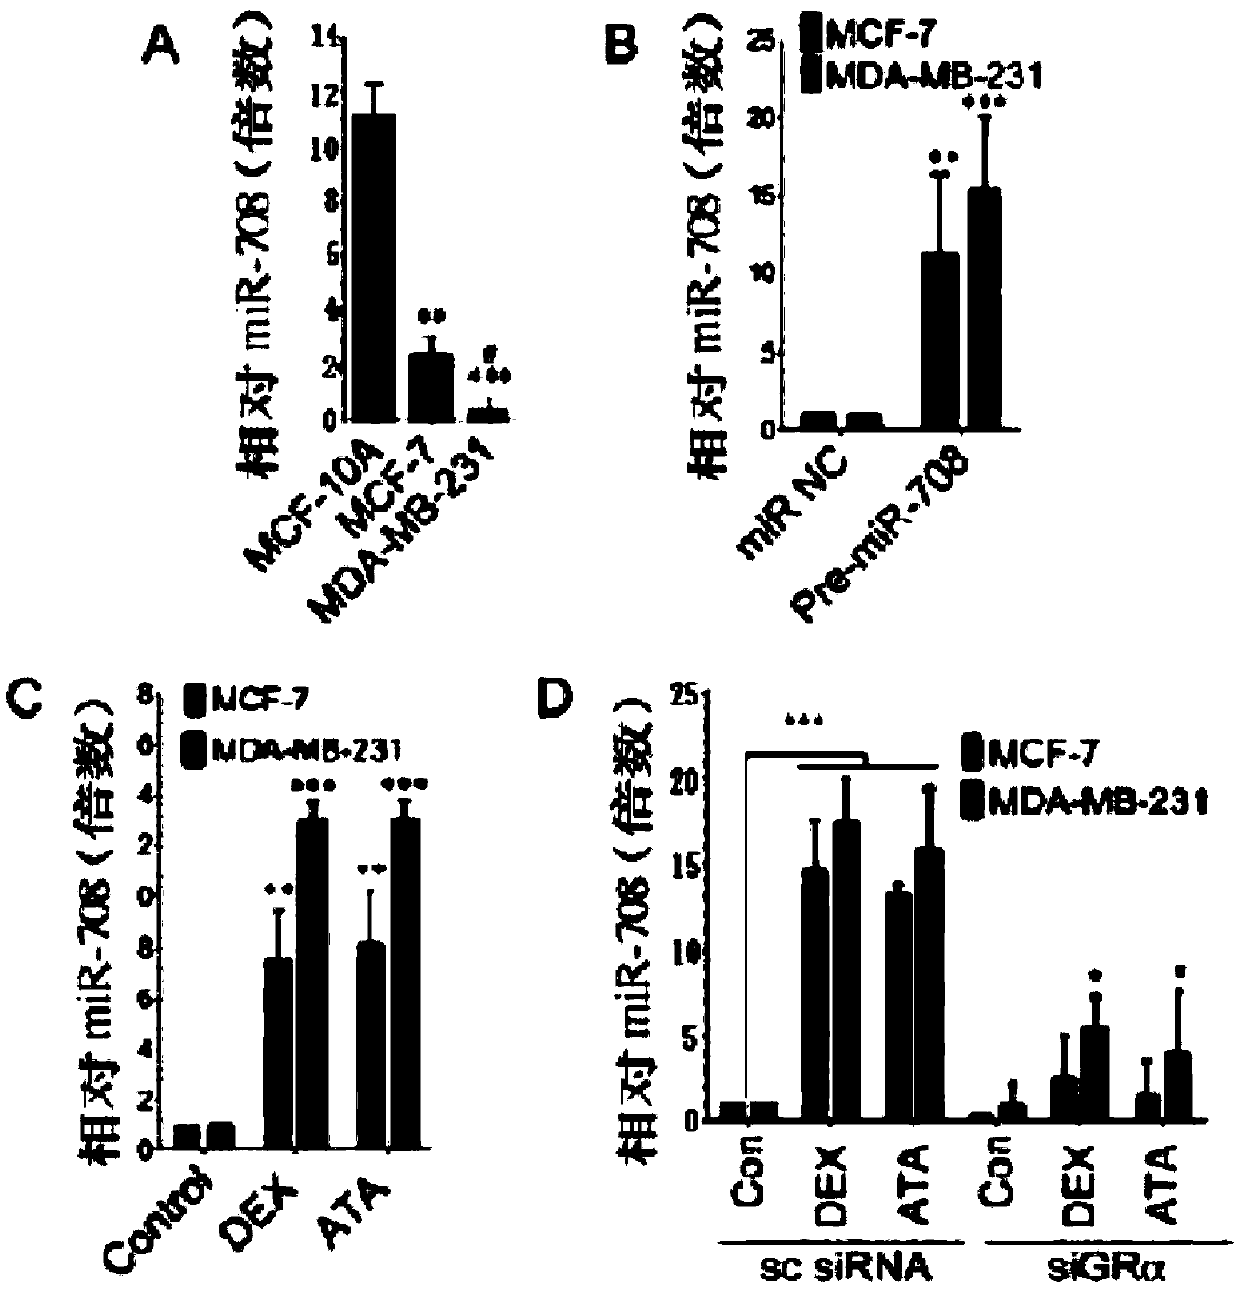 Application of glucocorticoid receptor accelerator antcin A in inhibiting tumorigenesis and metastasis of breast cancer